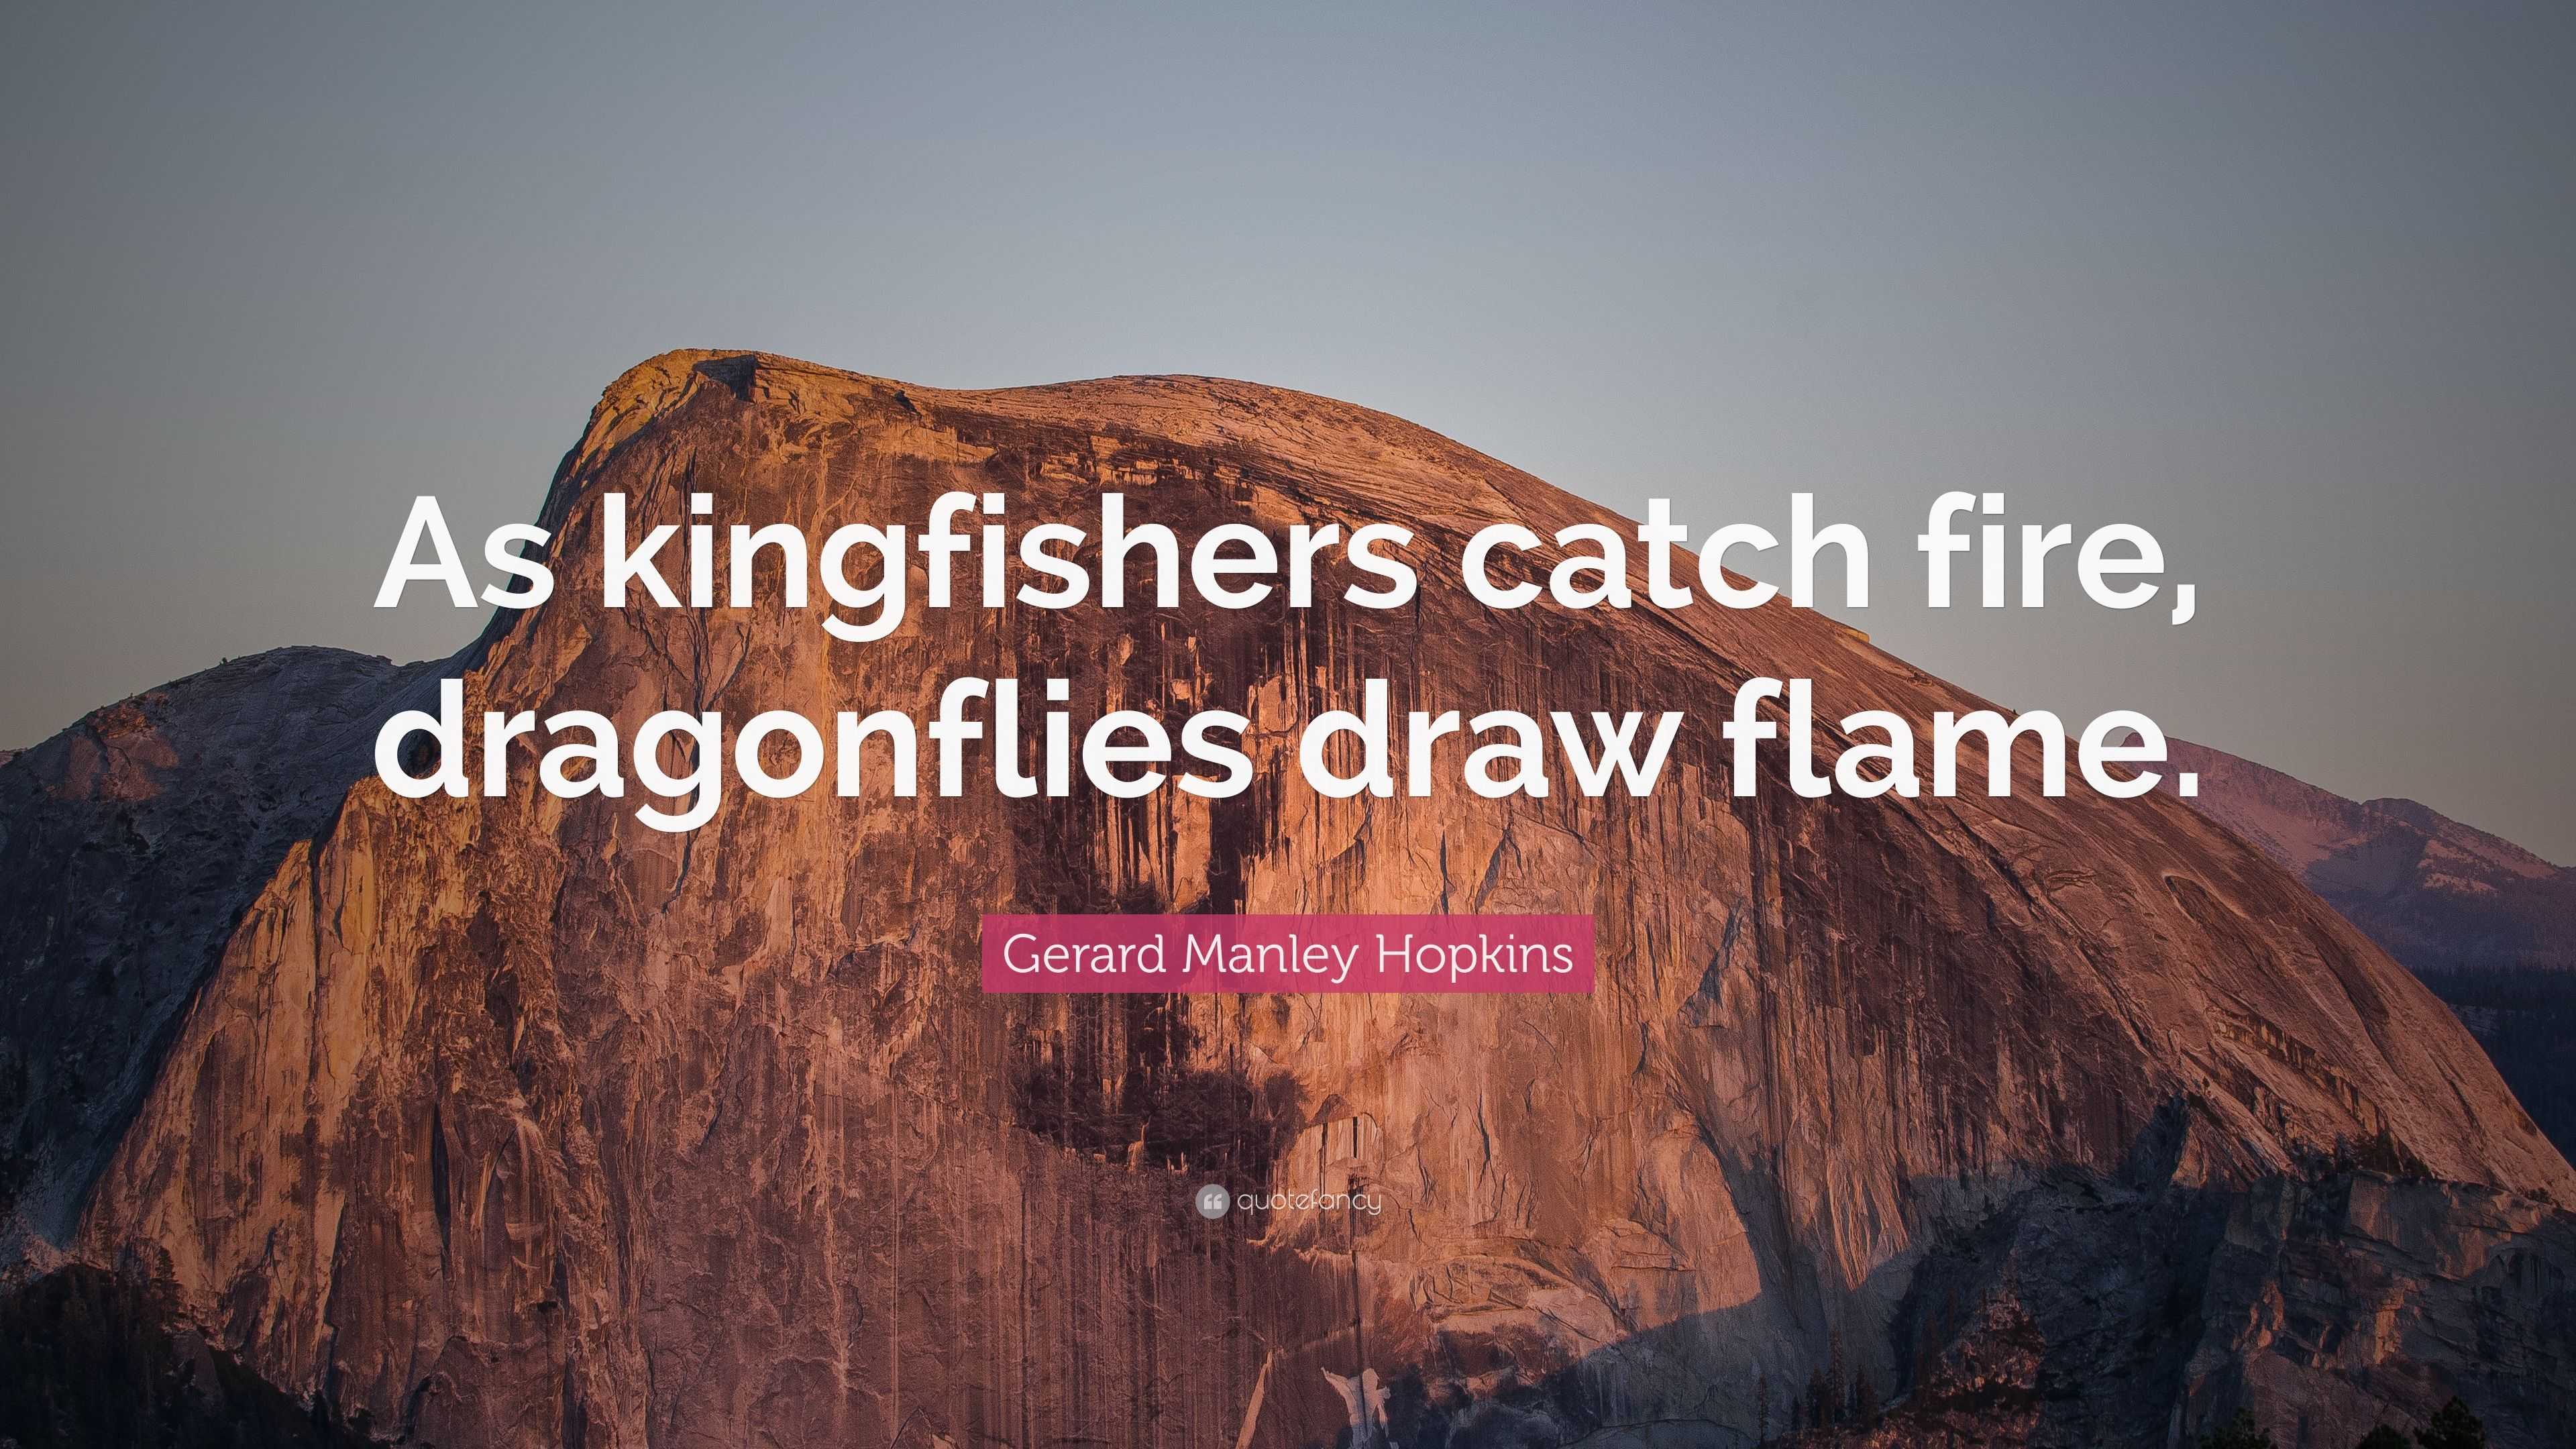 Gerard Manley Hopkins Quote “As kingfishers catch fire